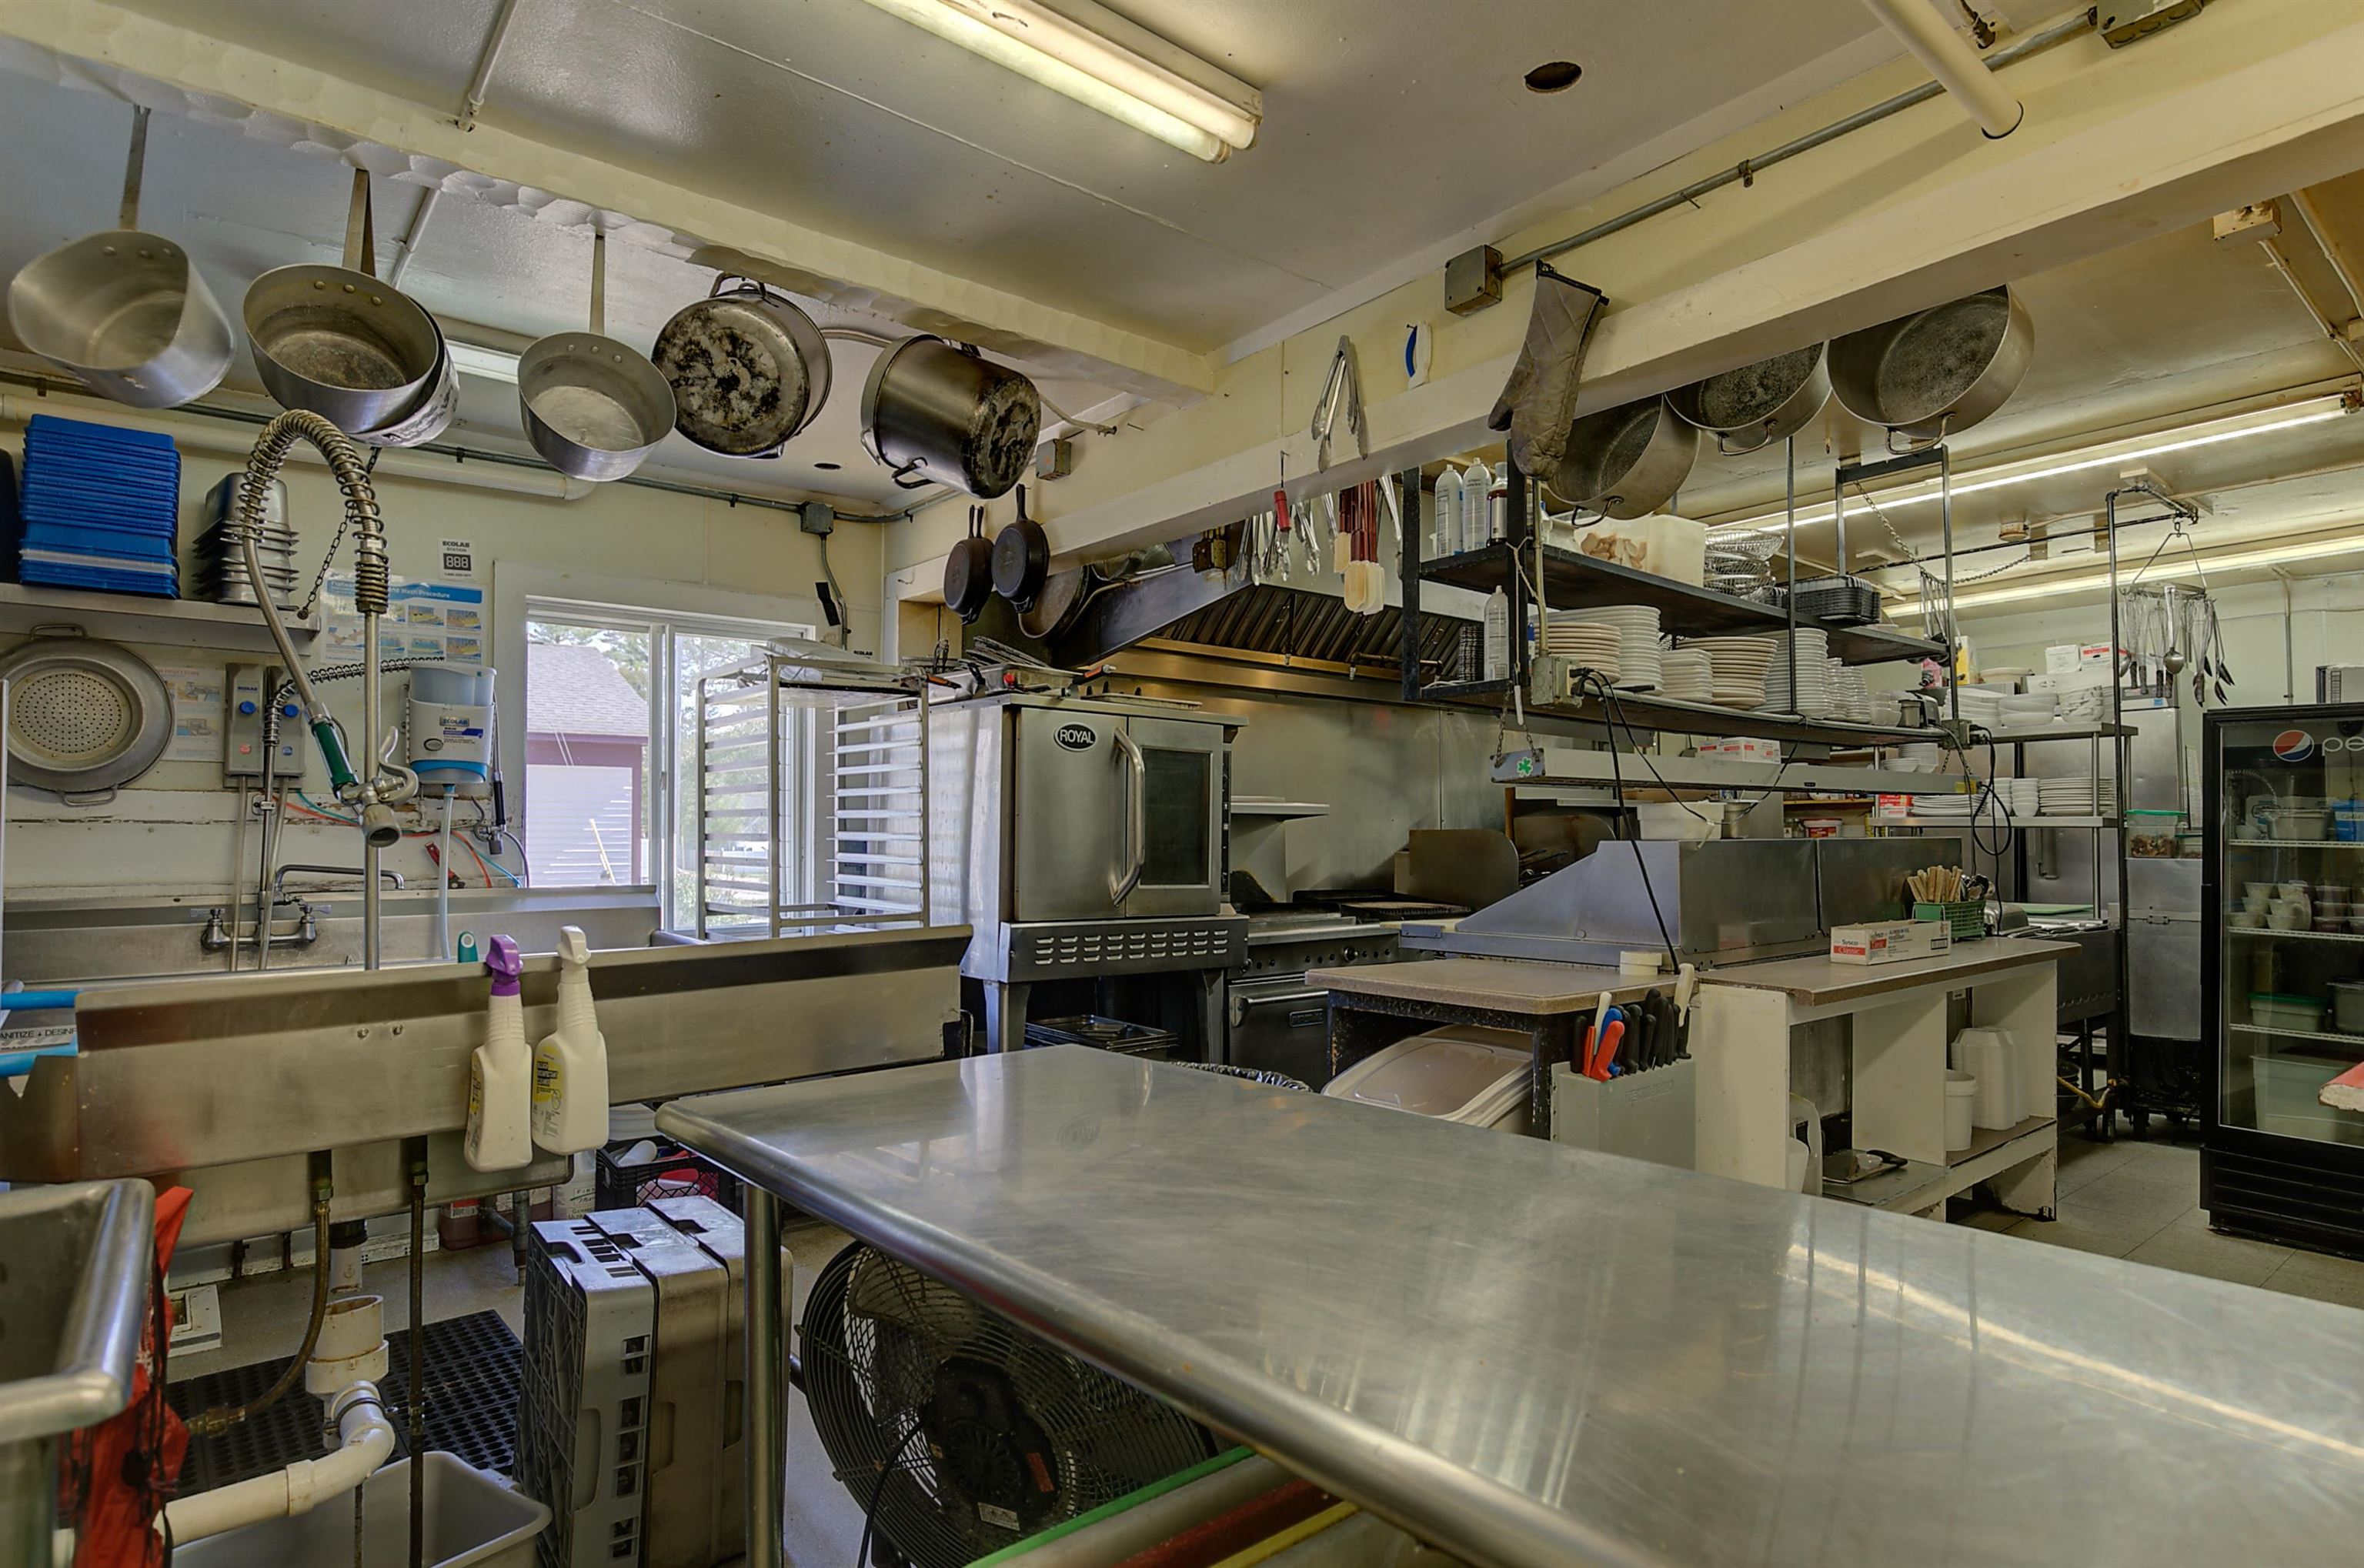 29. Commercial Kitchen (4)